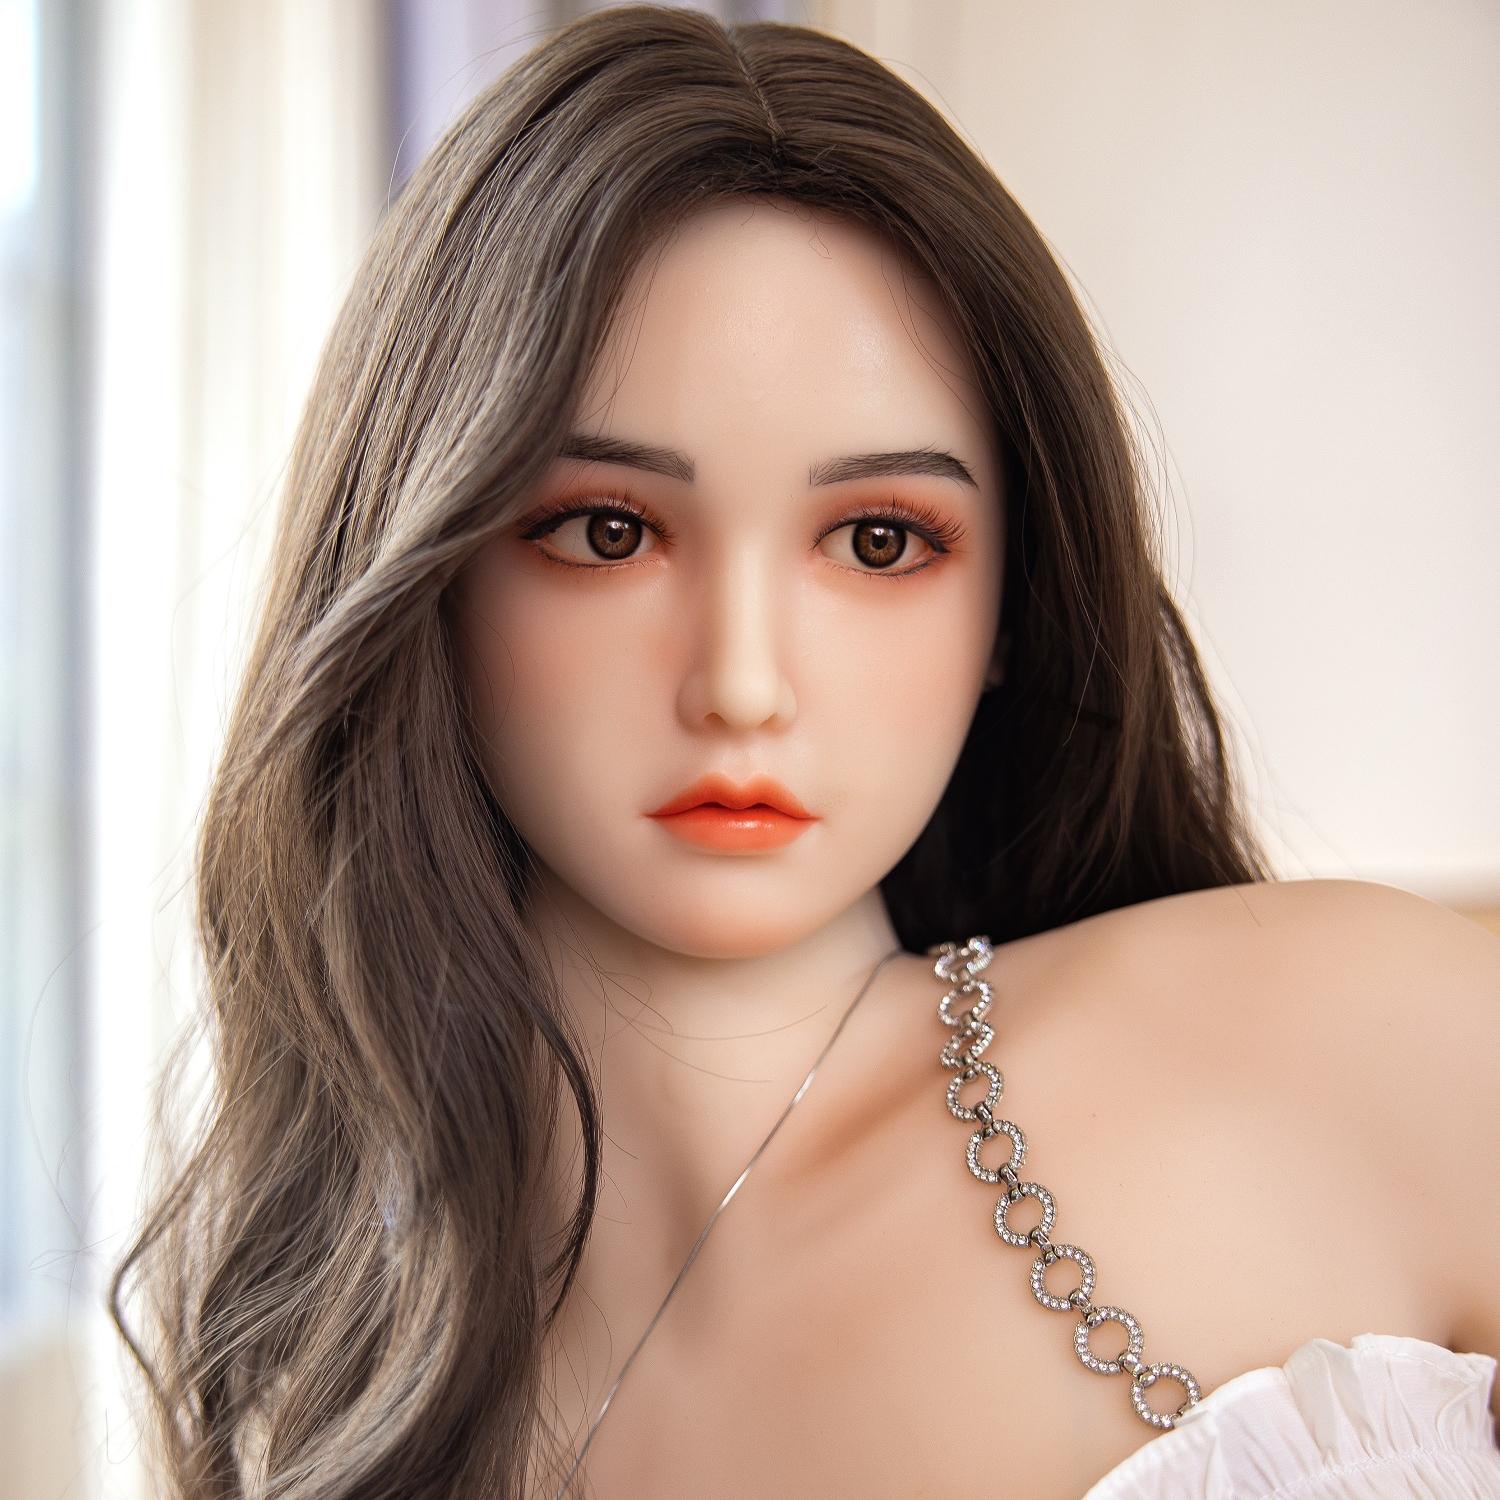 169cm Asian Face Metal Skeleton Silicone Sex Doll Full Body Silicone Realistic Sex Dolls For Men